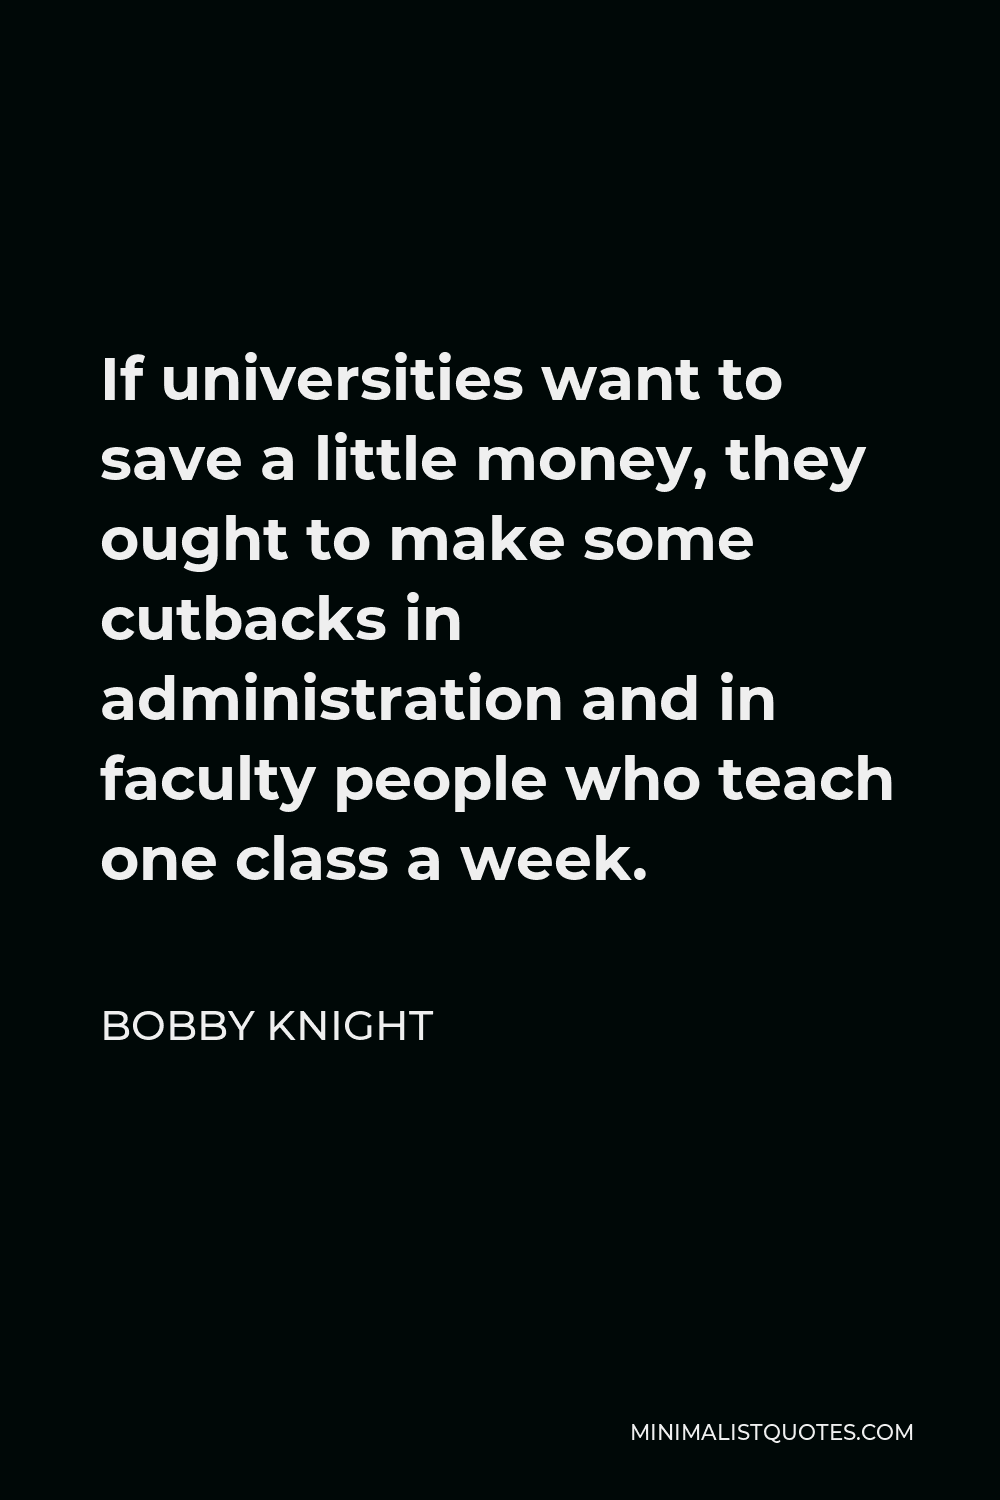 Bobby Knight Quote - If universities want to save a little money, they ought to make some cutbacks in administration and in faculty people who teach one class a week.